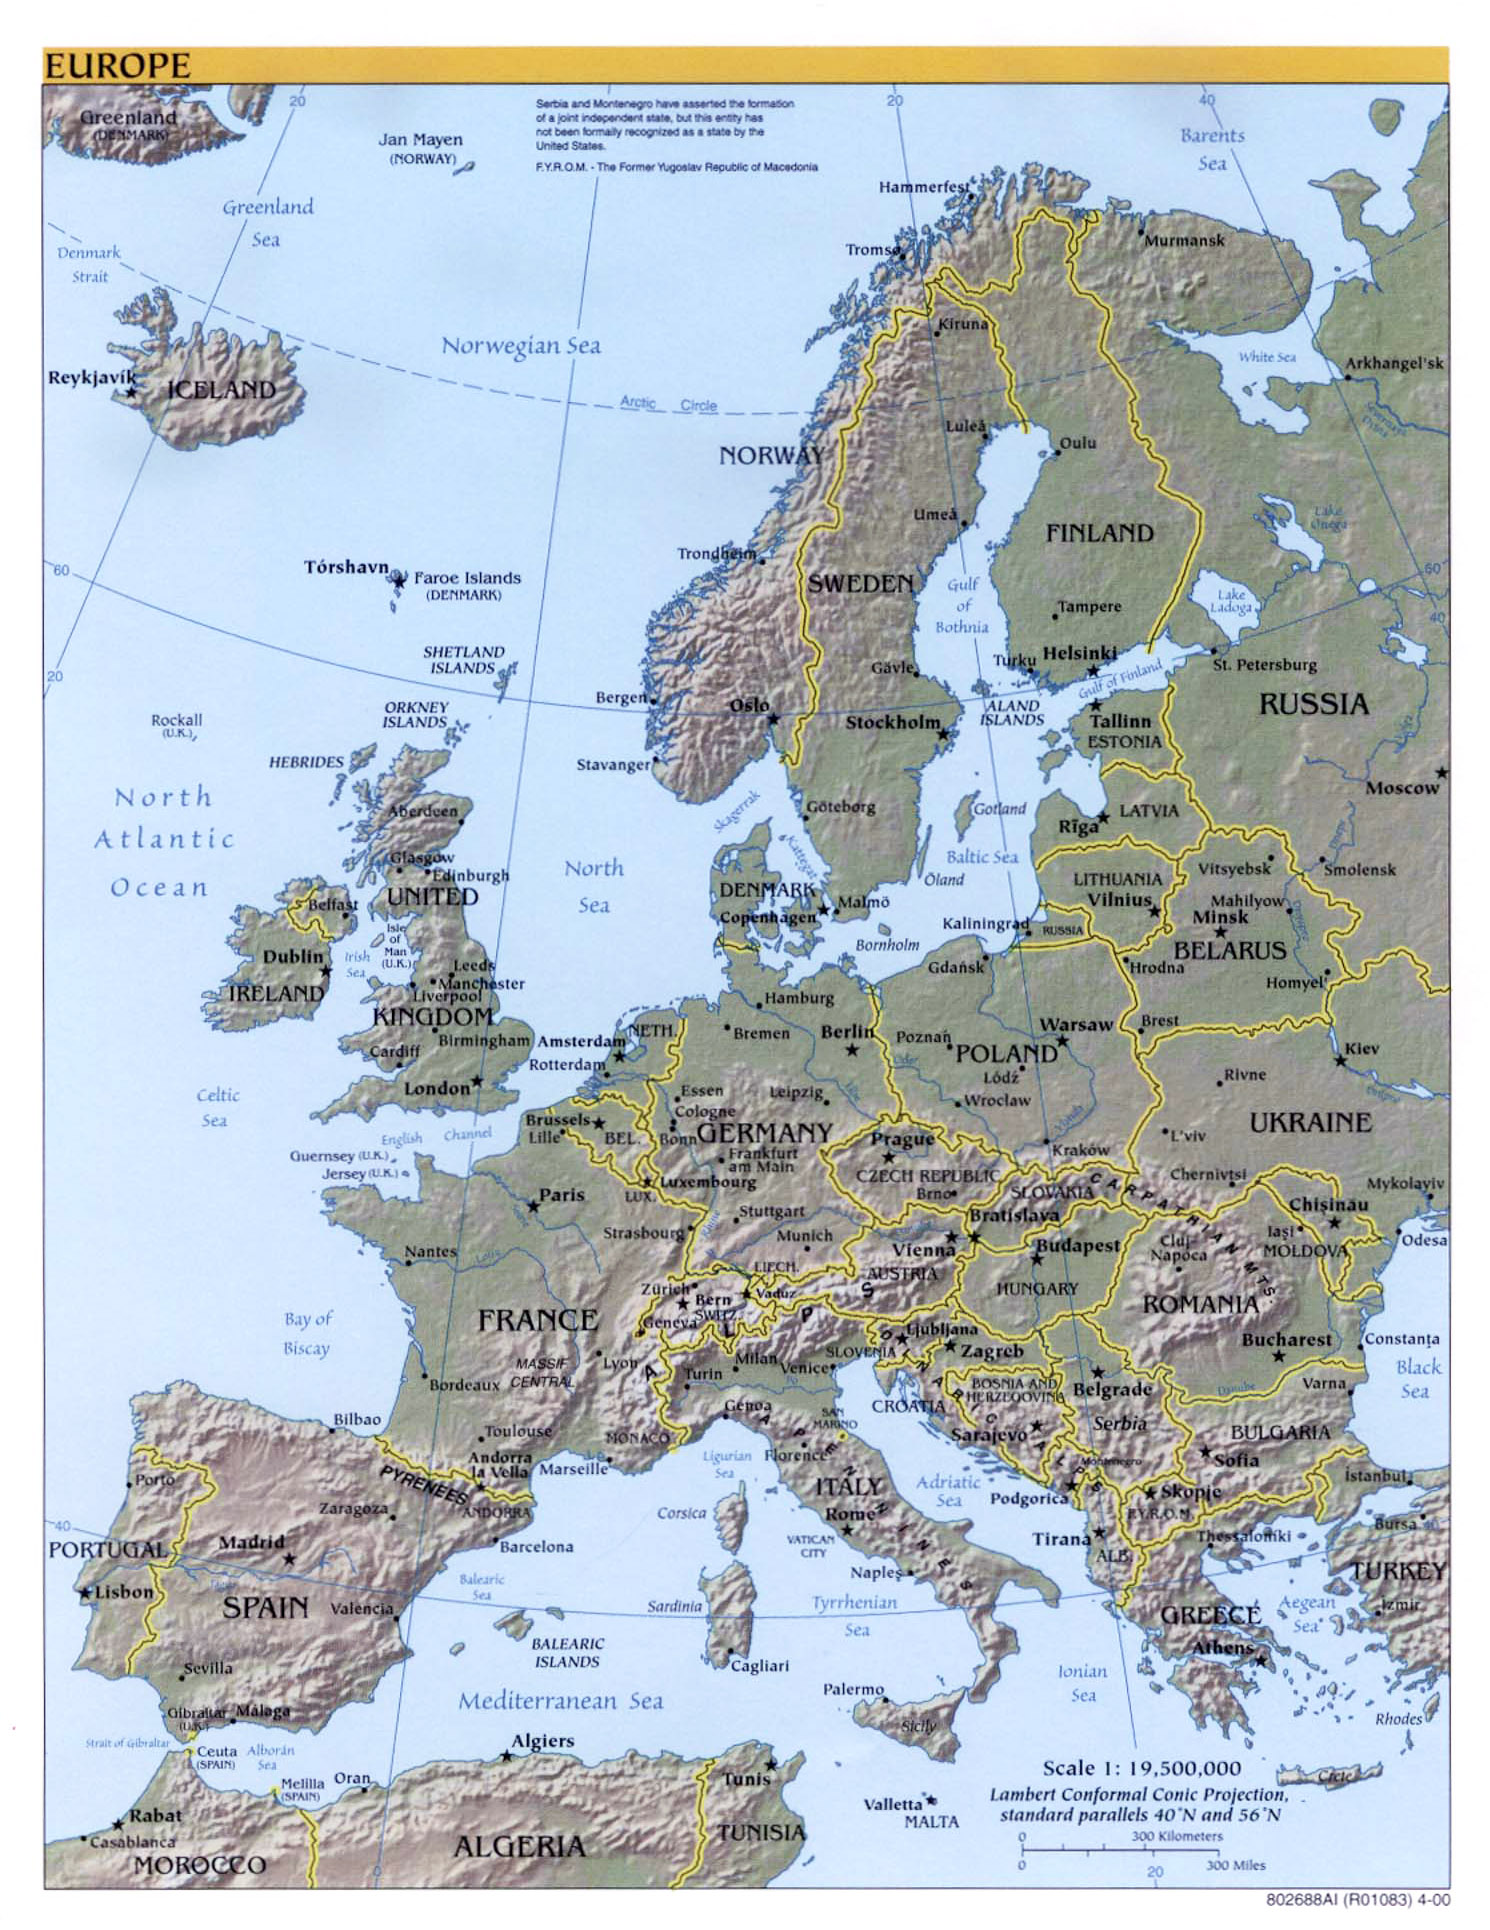 large-detailed-political-map-of-europe-with-relief-capitals-and-major